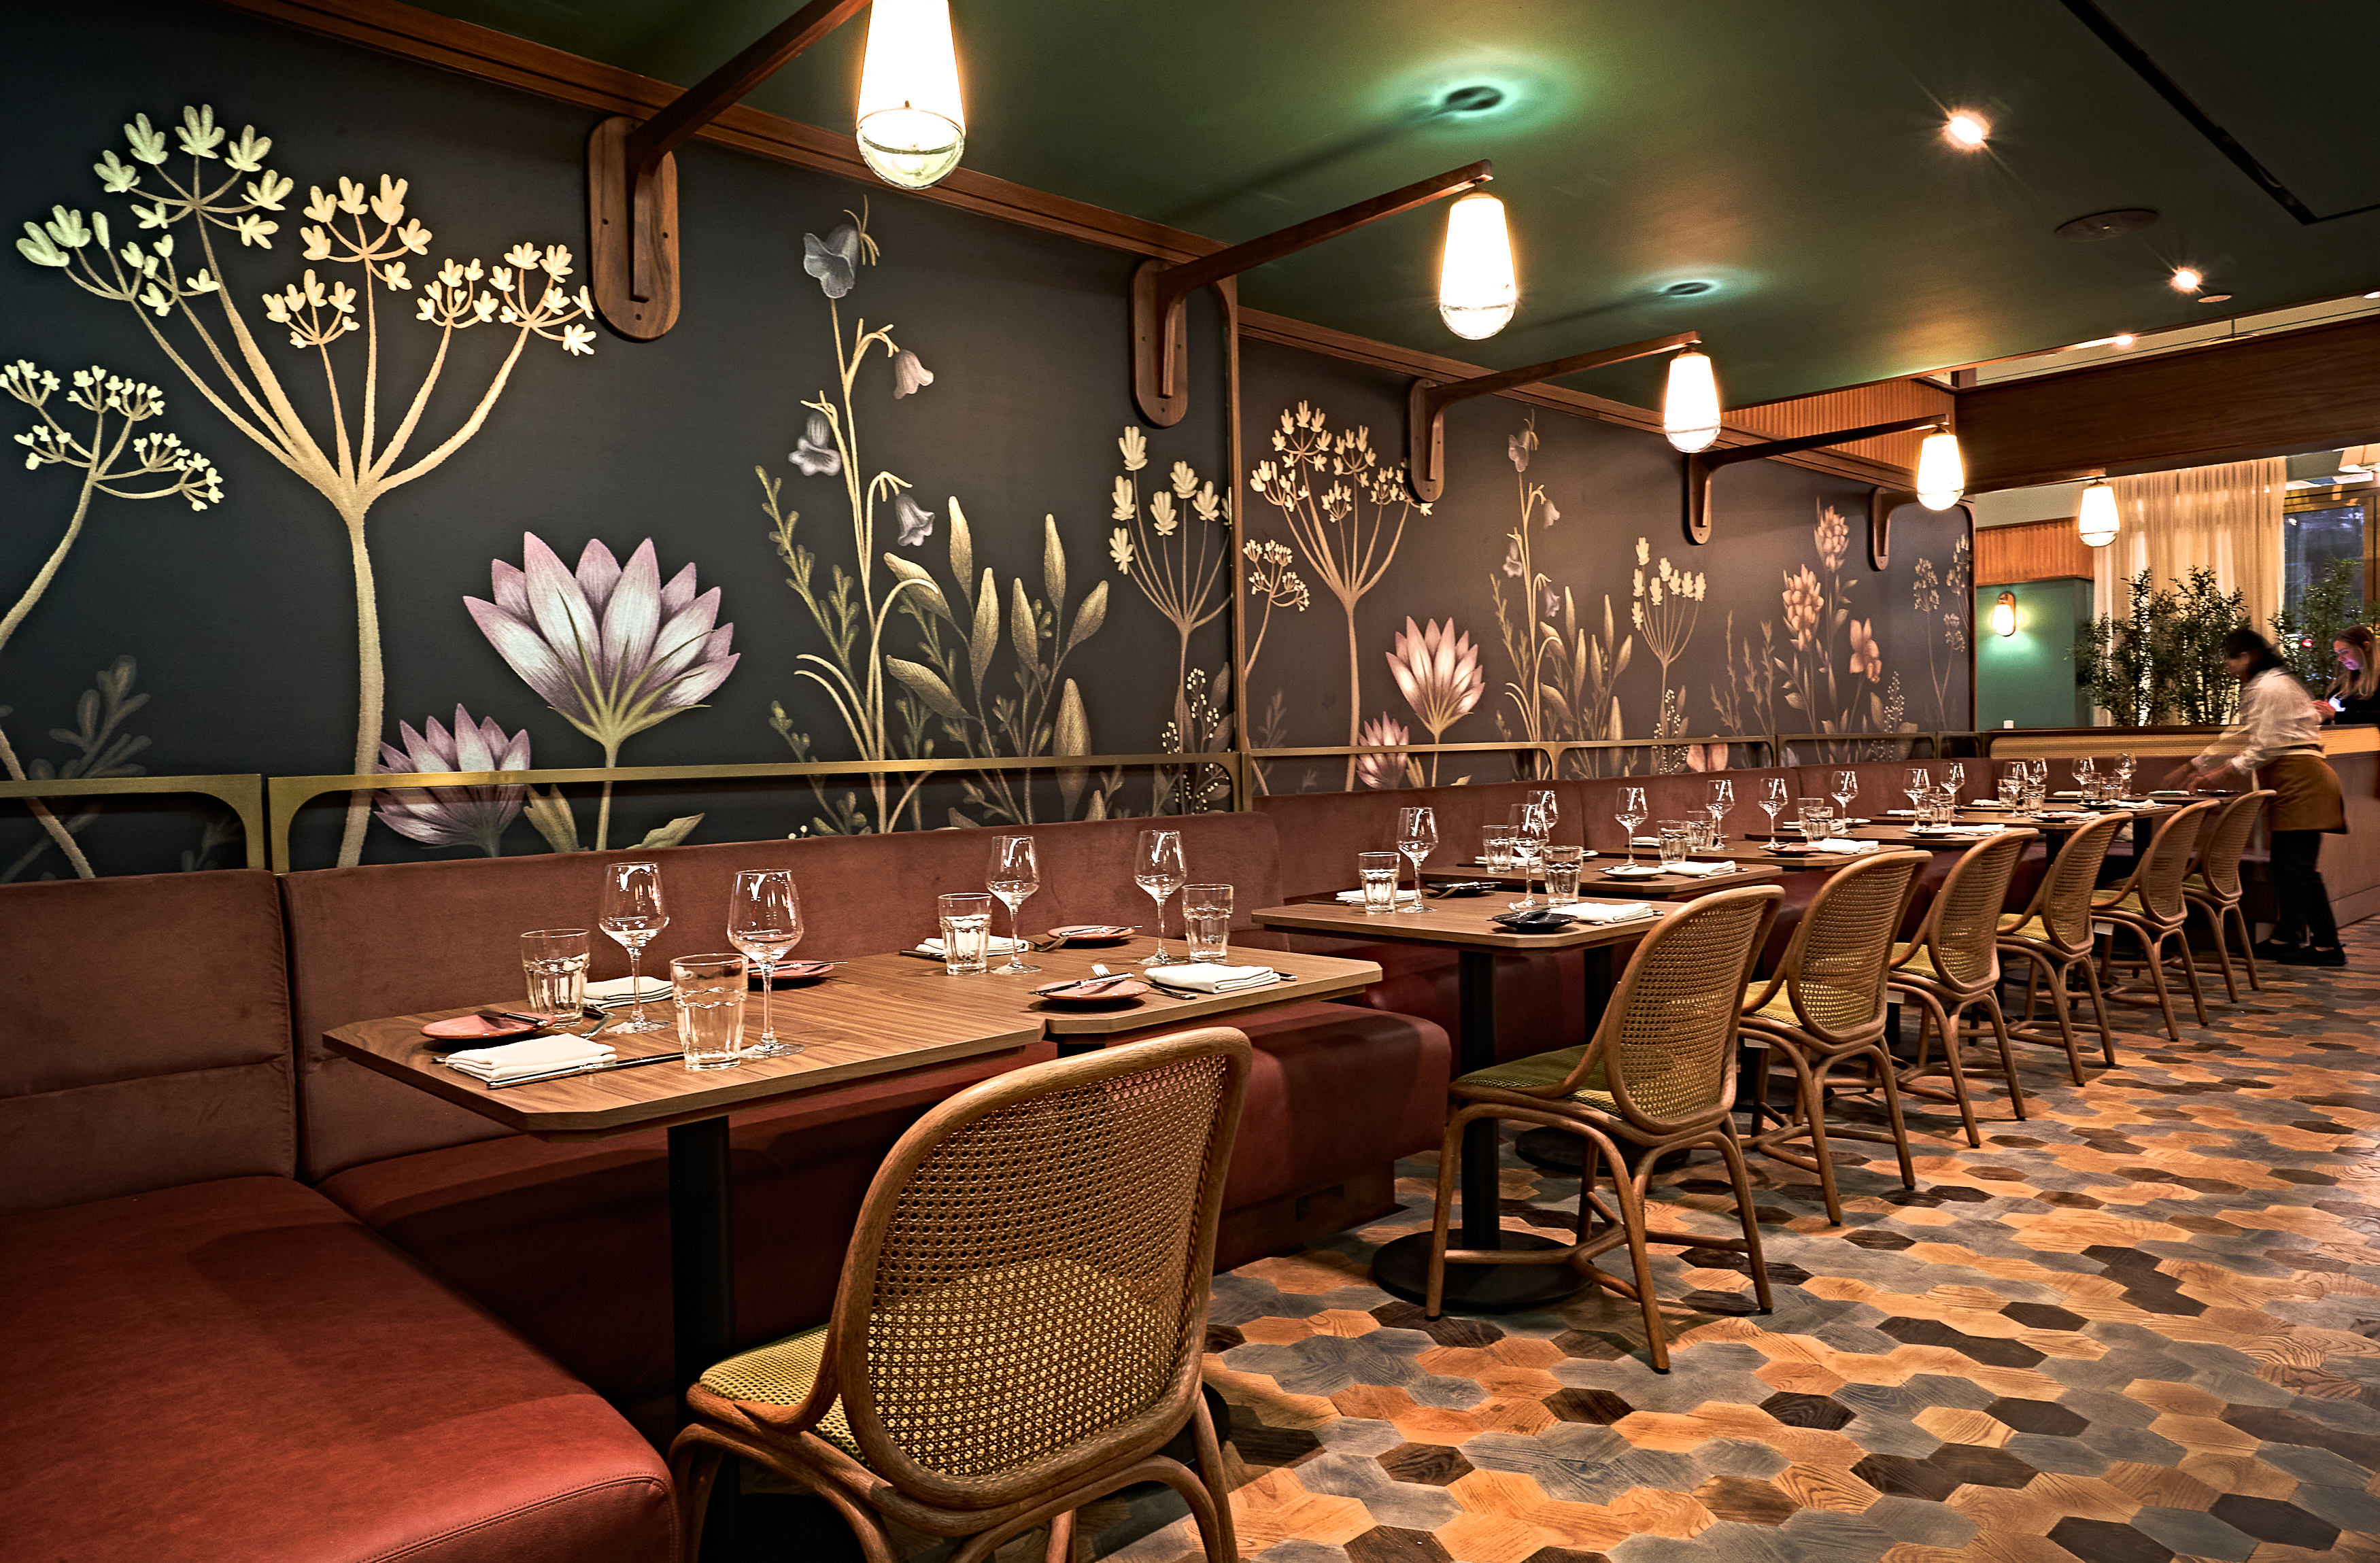 A wallpapered dining room at a newly opened restaurant.